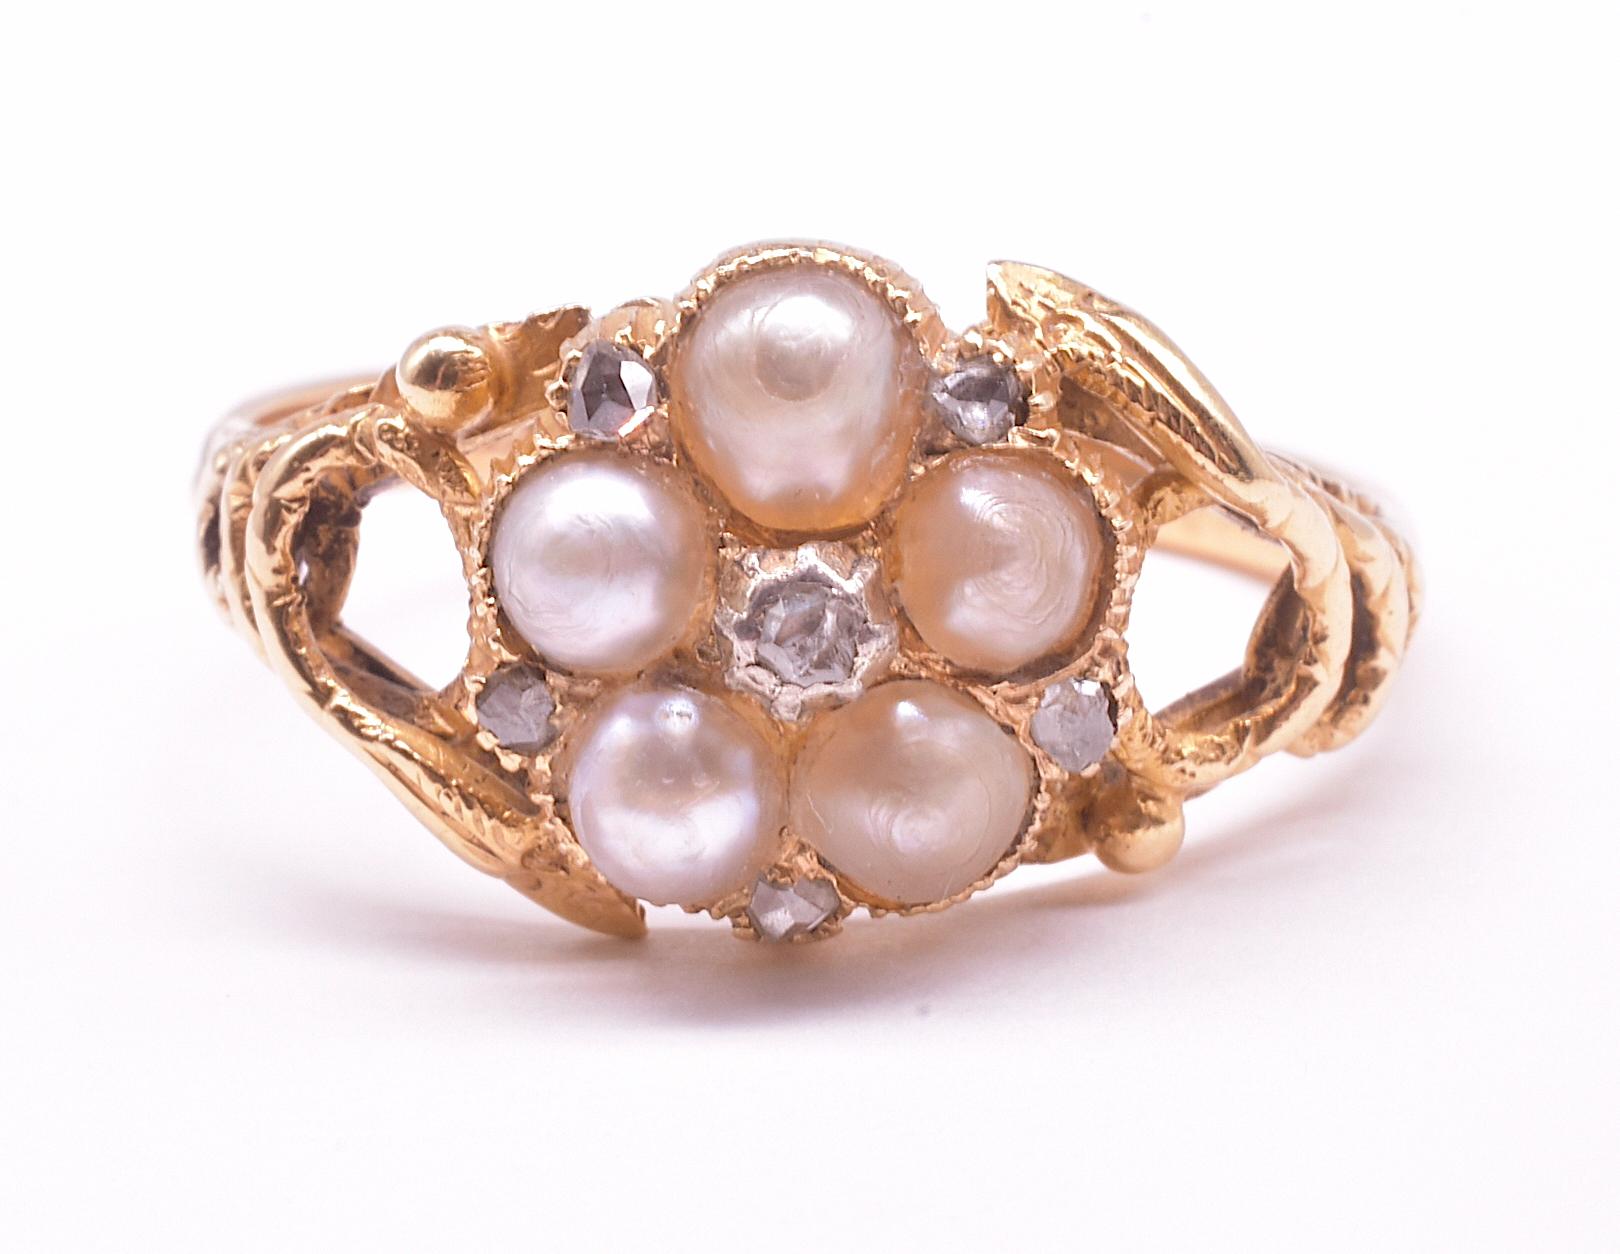 This romantic Georgian Natural Pearl Forget Me not Ring would have been given as a love ring back in its day.  With its five  pearls, it is evocative of the forget-me-not flower. A coiled serpent curls around each side of the ring enveloping their